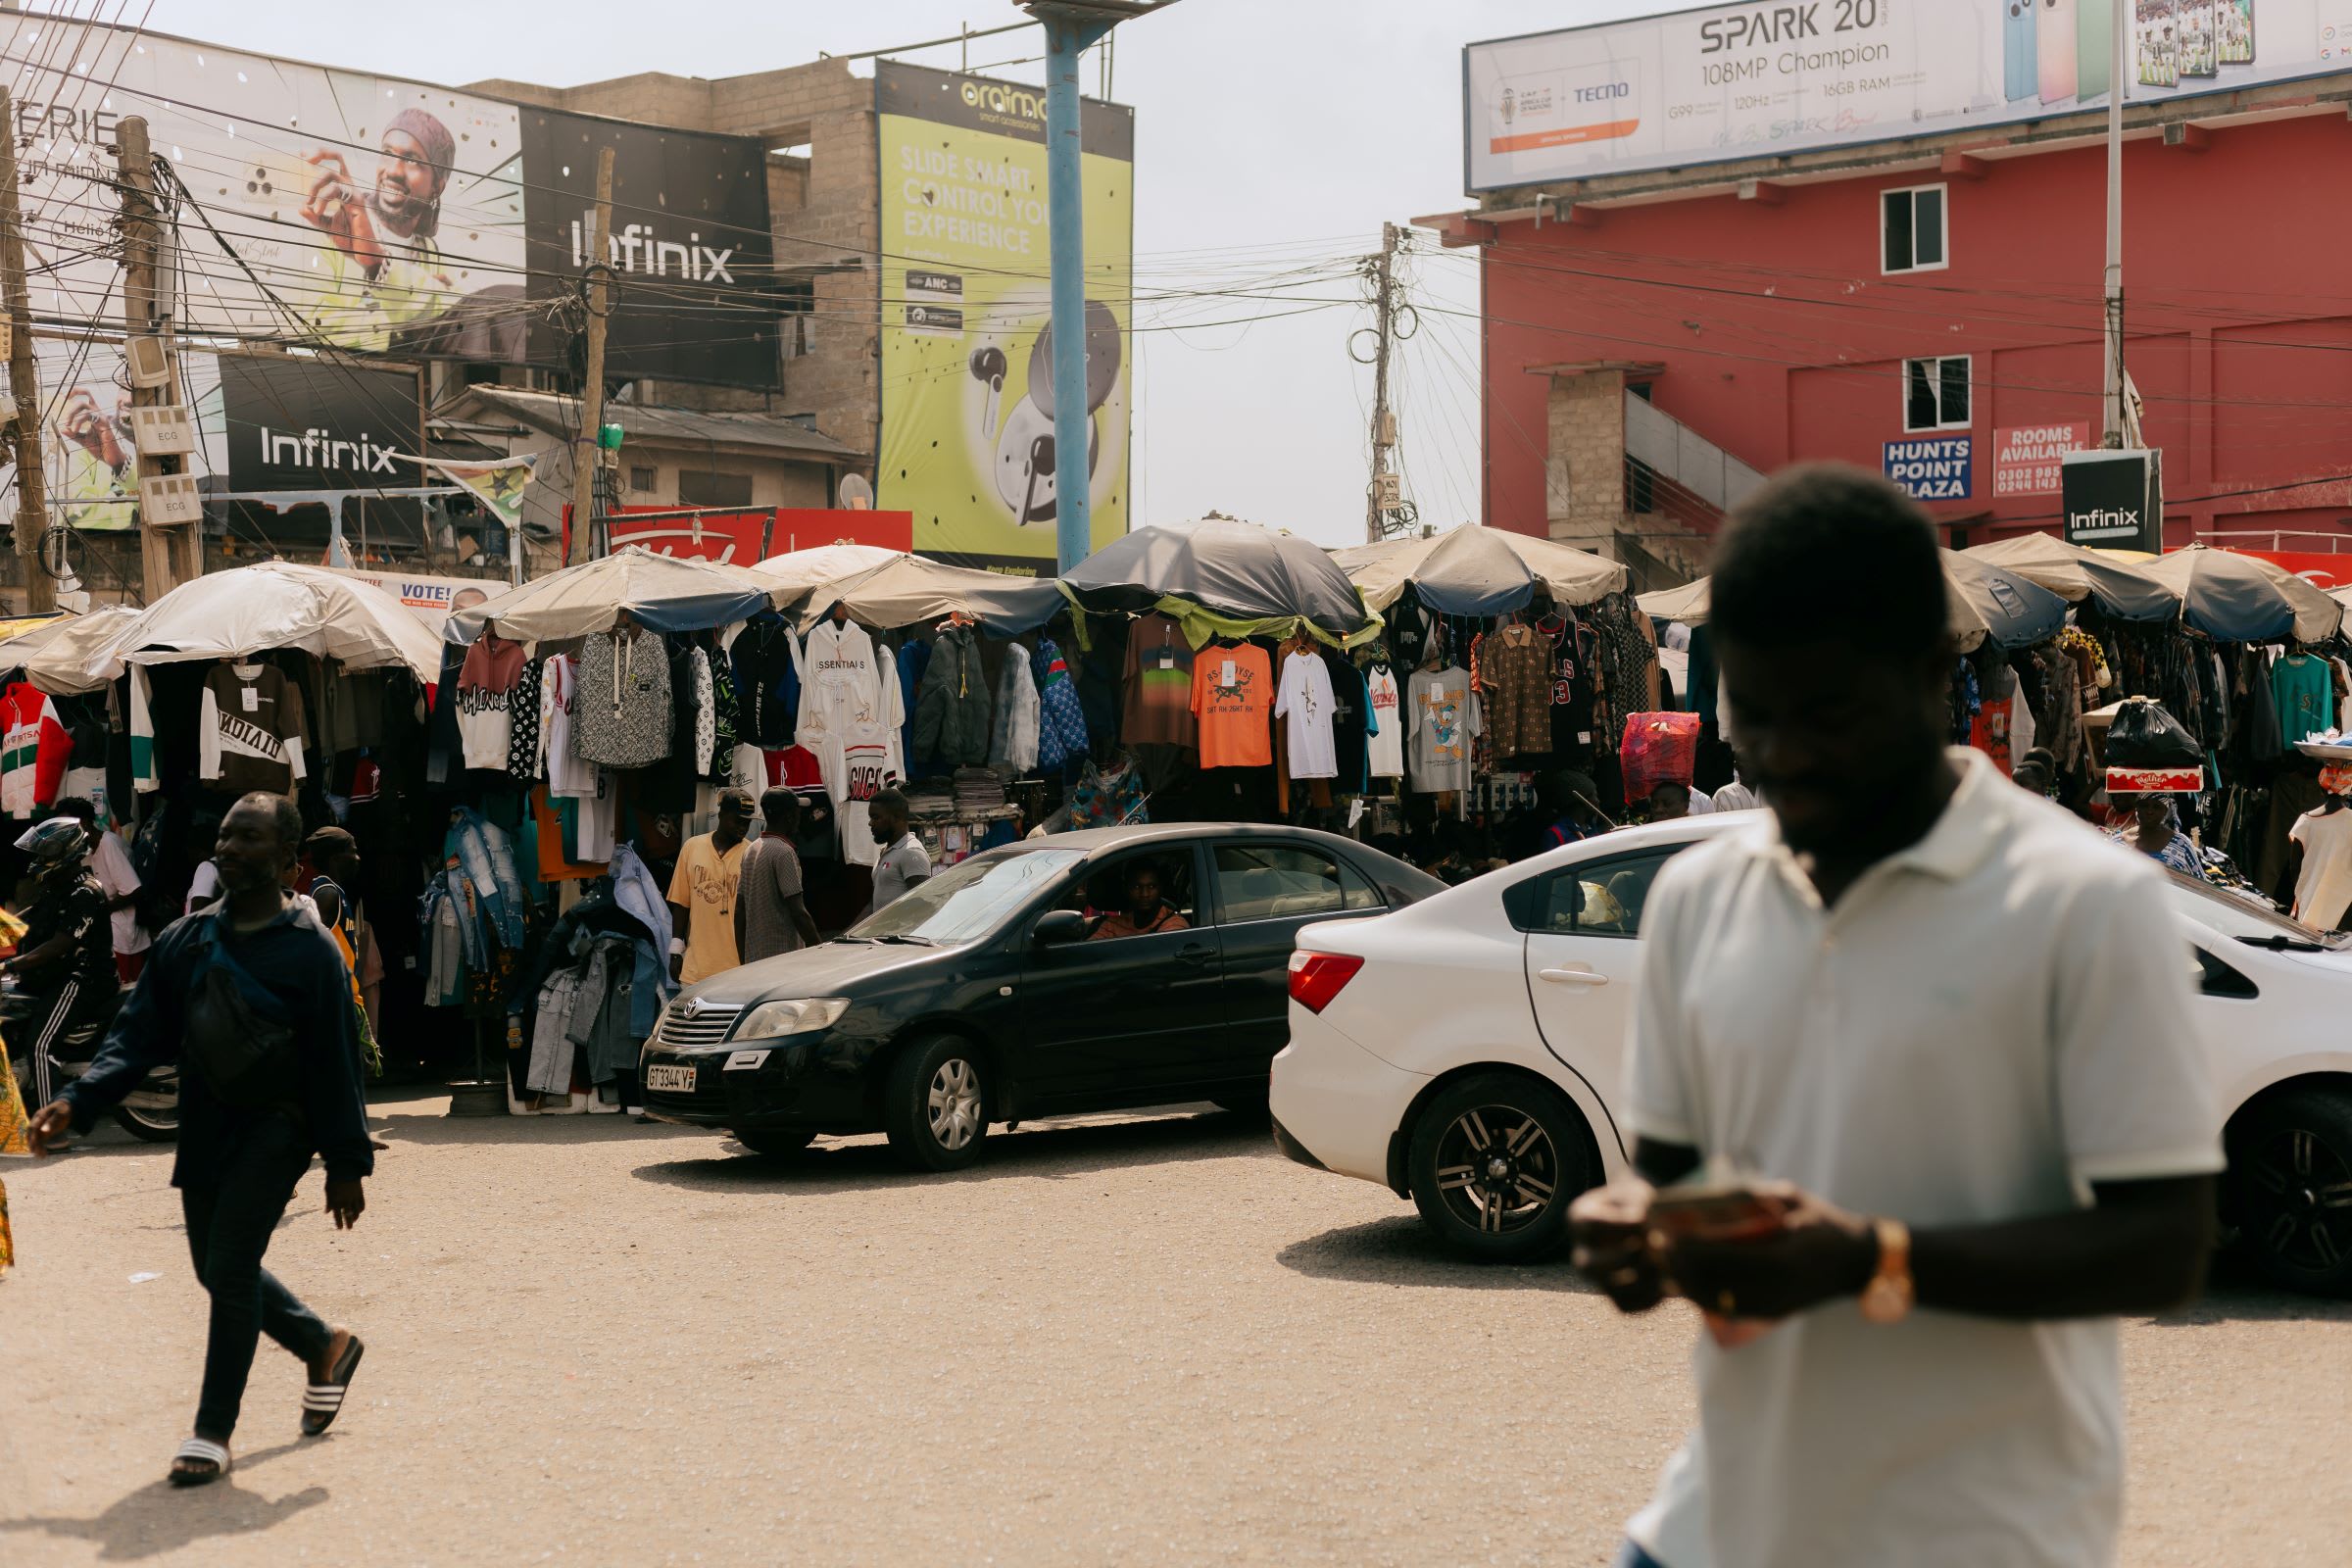 The streets of Accra. Photography by Rachel Seidu for Art Basel.